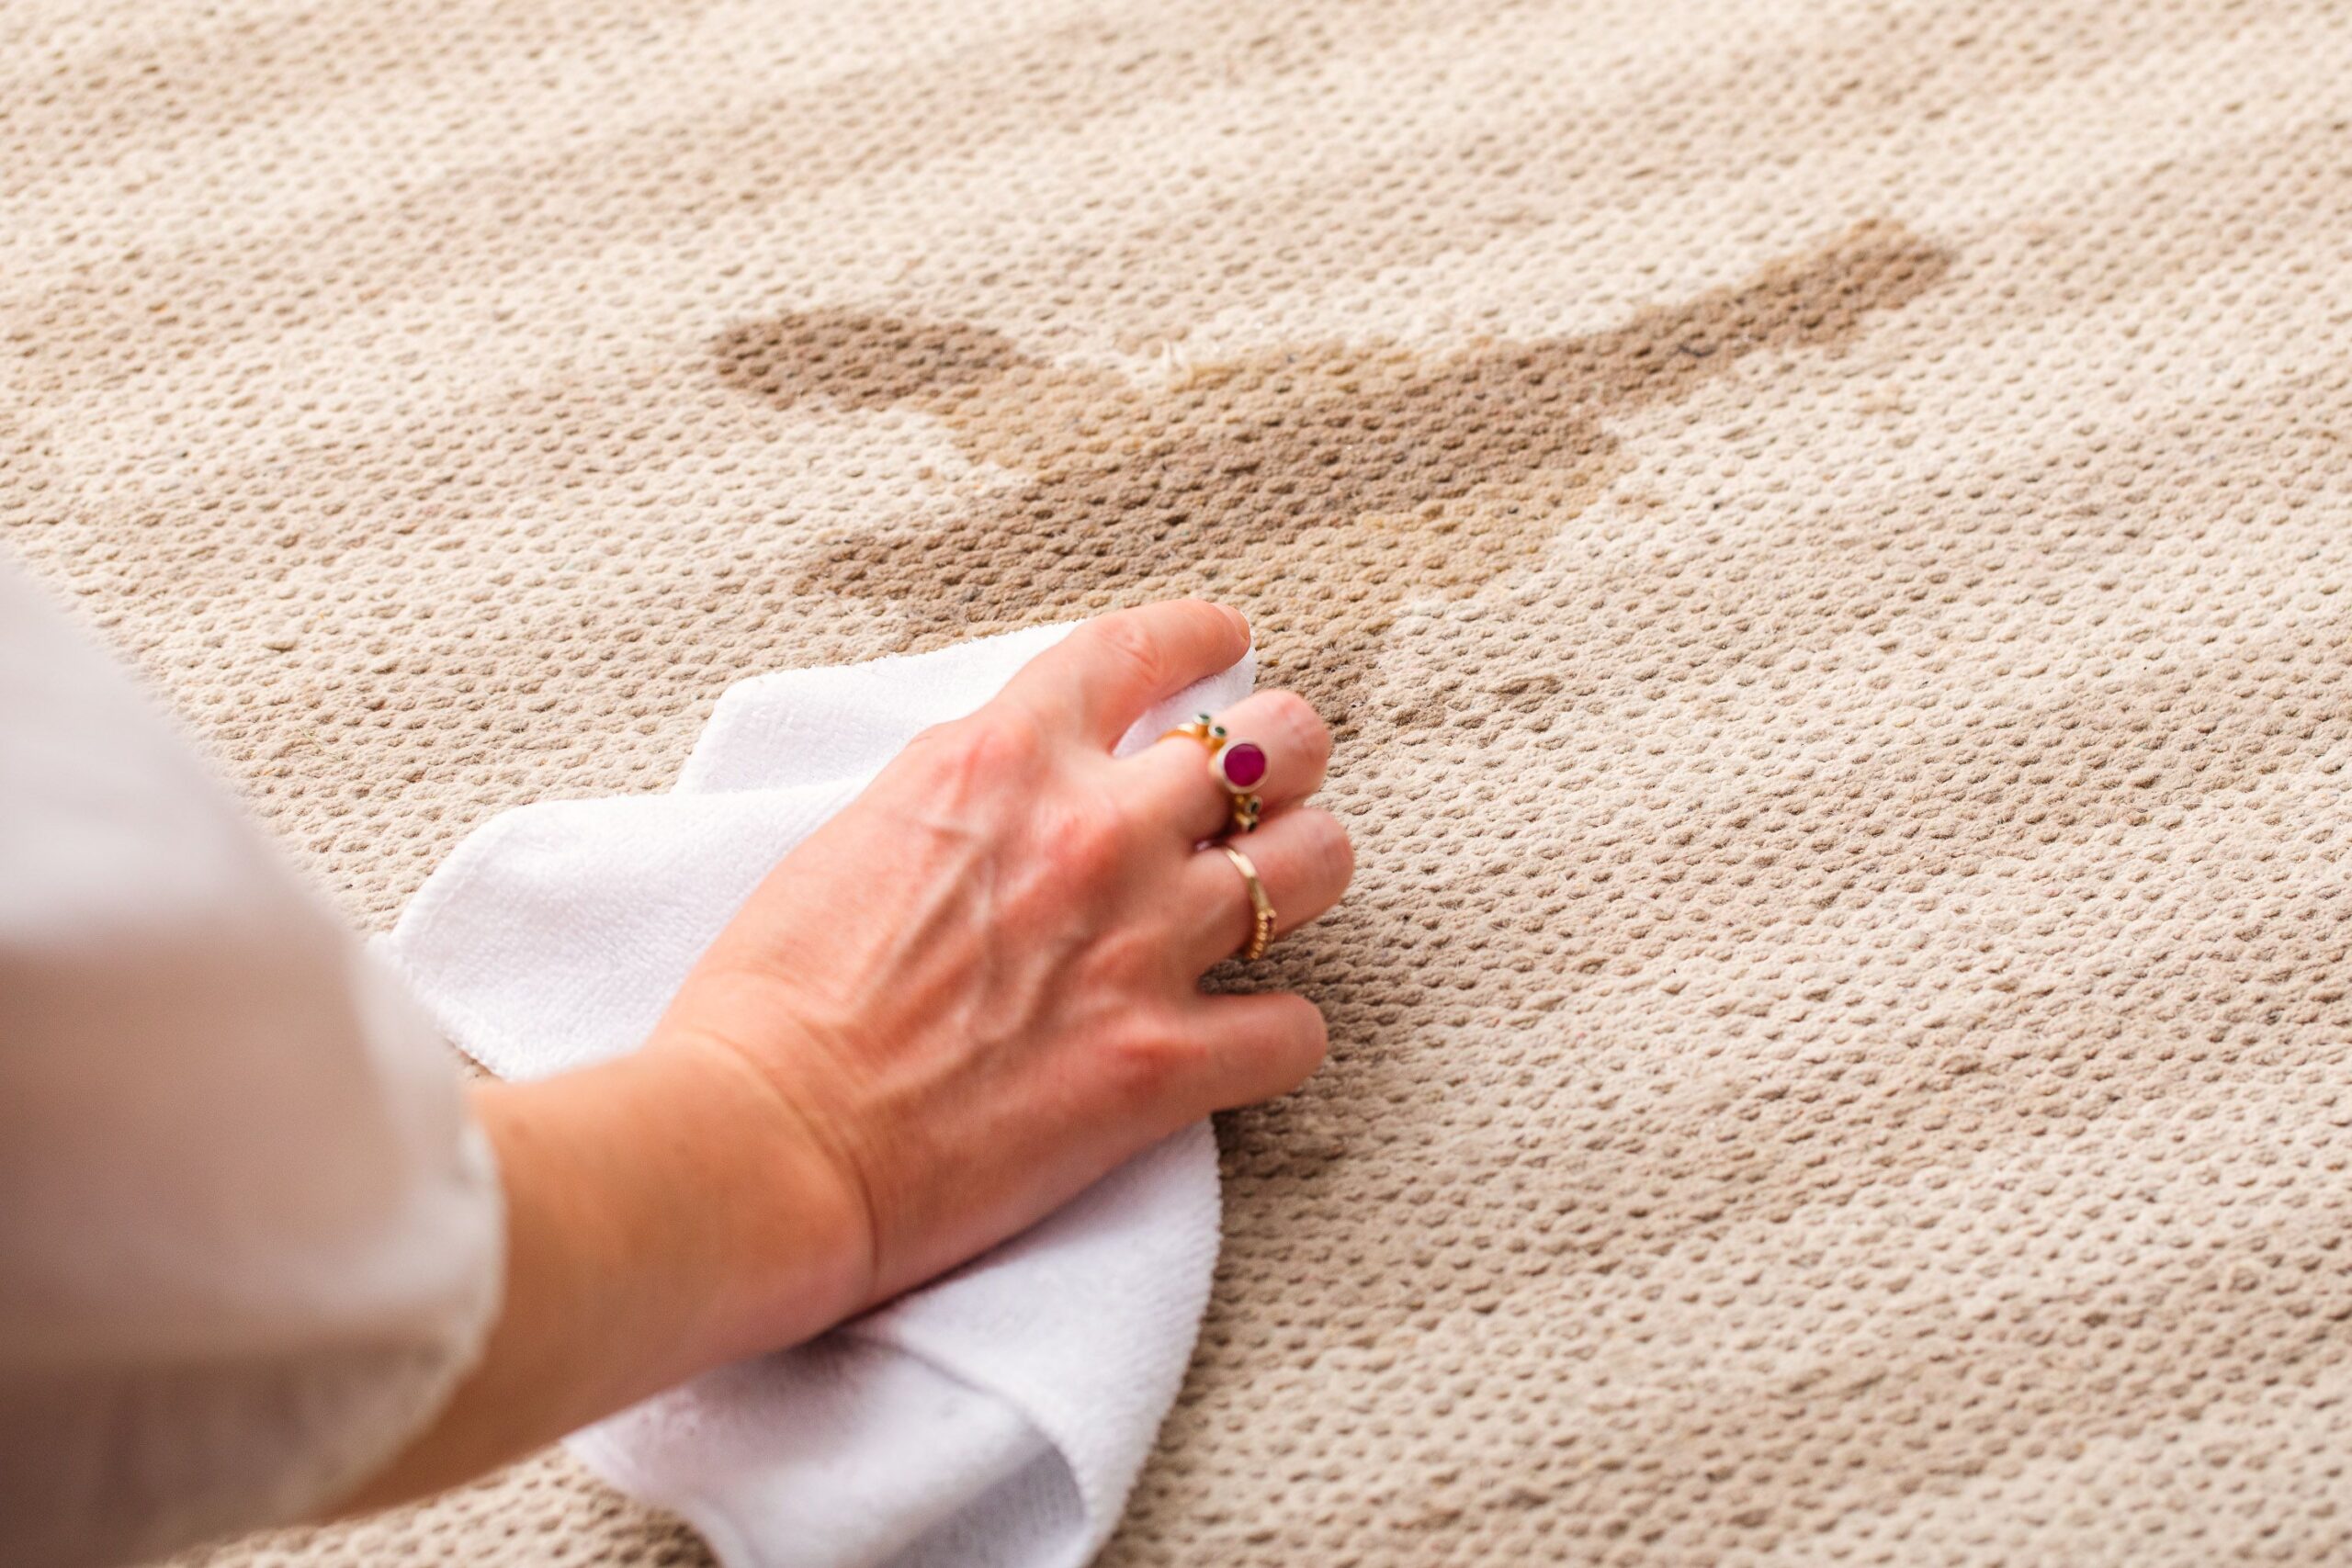 Renew Your Furniture and Carpet with these Stain Removal Tips